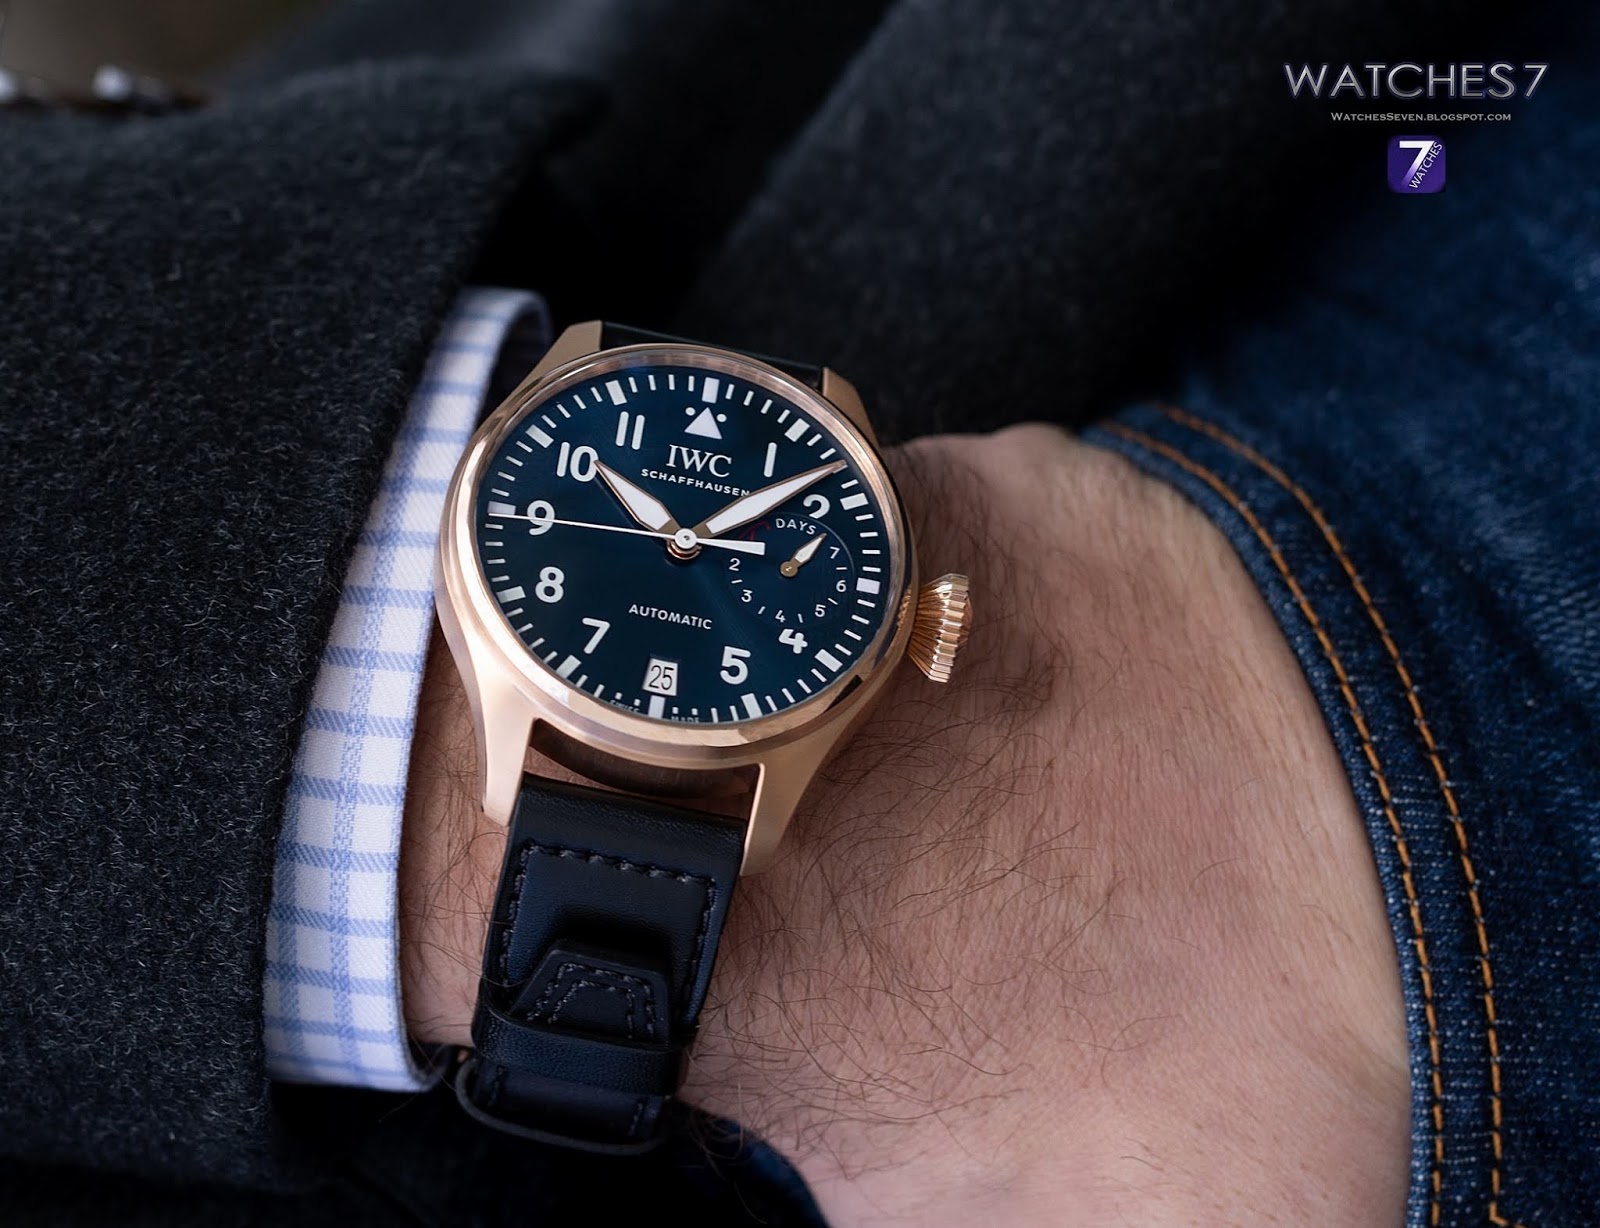 IWC SCHAFFHAUSEN, BIG PILOT, REF IW500923 single piece 5N gold wristwatch  with date, power reserve and special engraving, was worn by Bradley Cooper  at the 91st Academy Awards®